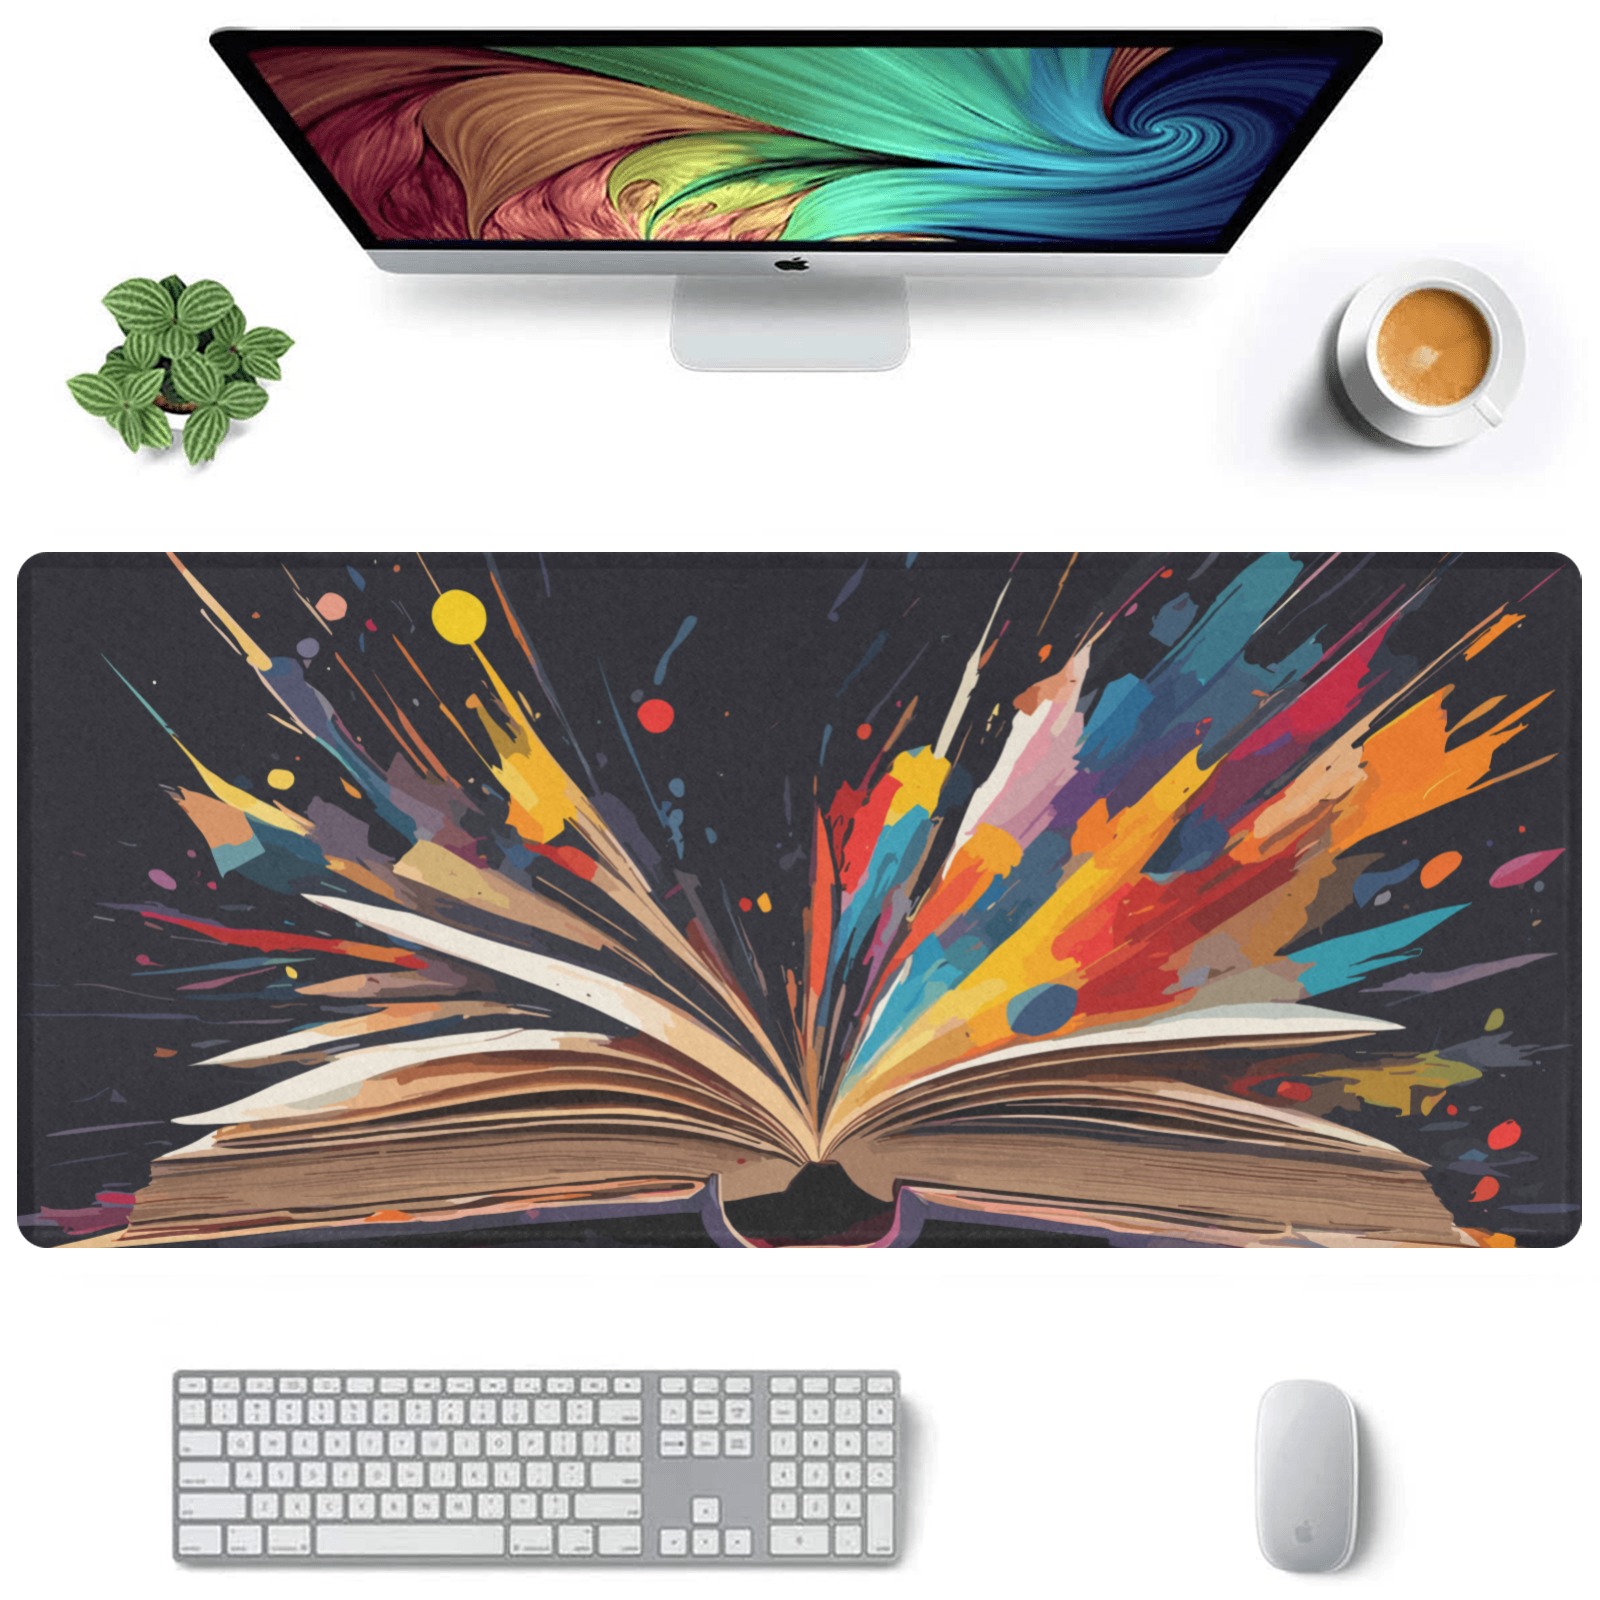 Colorful fantasy erupts from the open book art Gaming Mousepad (35"x16")